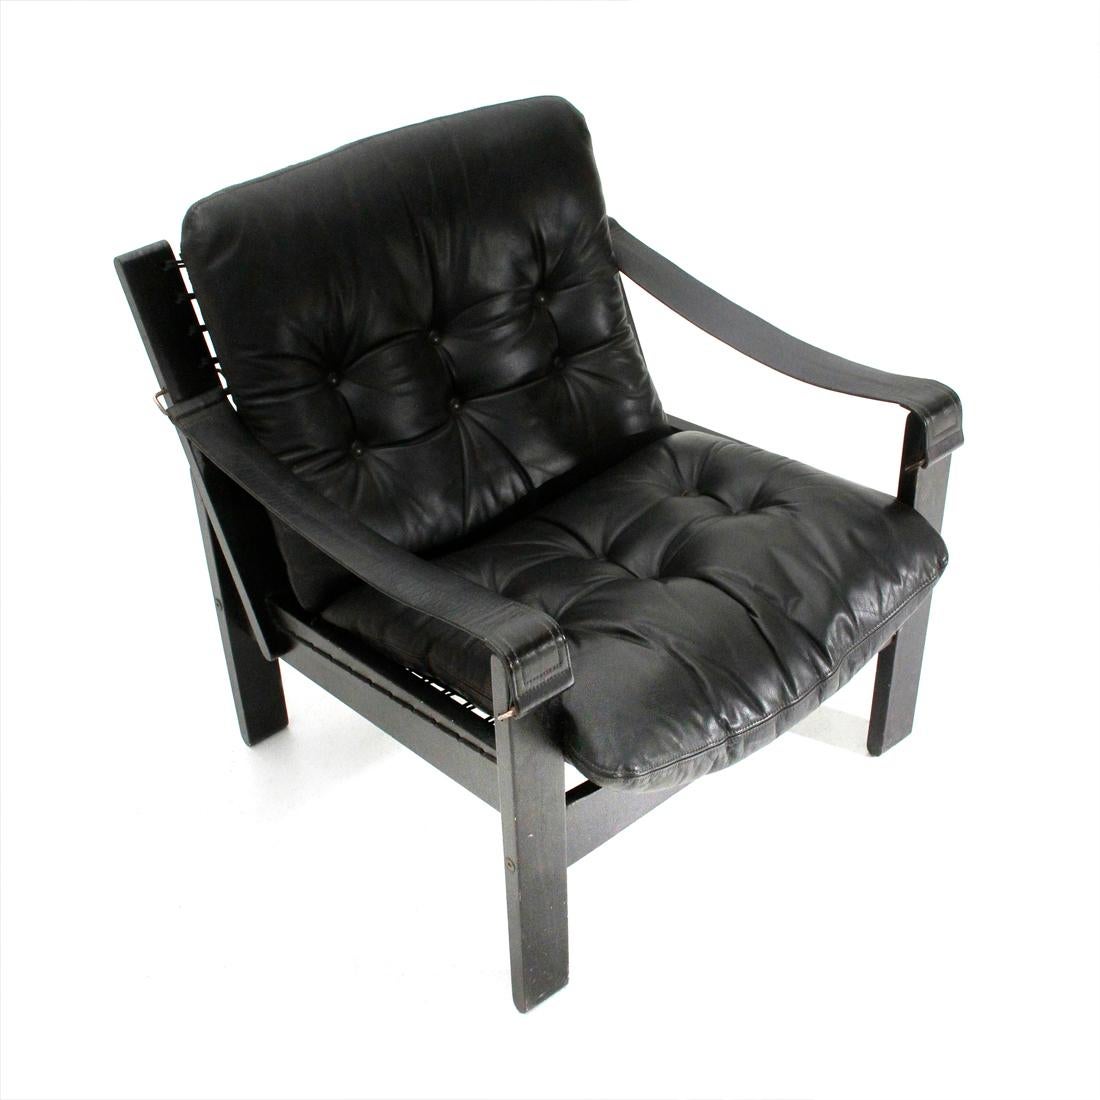 Norwegian-made armchair produced in the 1970s.
Black painted solid wood structure.
Black canvas seat on which the black leather stitched cushions with buttons rest.
Armrests in leather.
Good condition, some signs and lack of paint due to normal